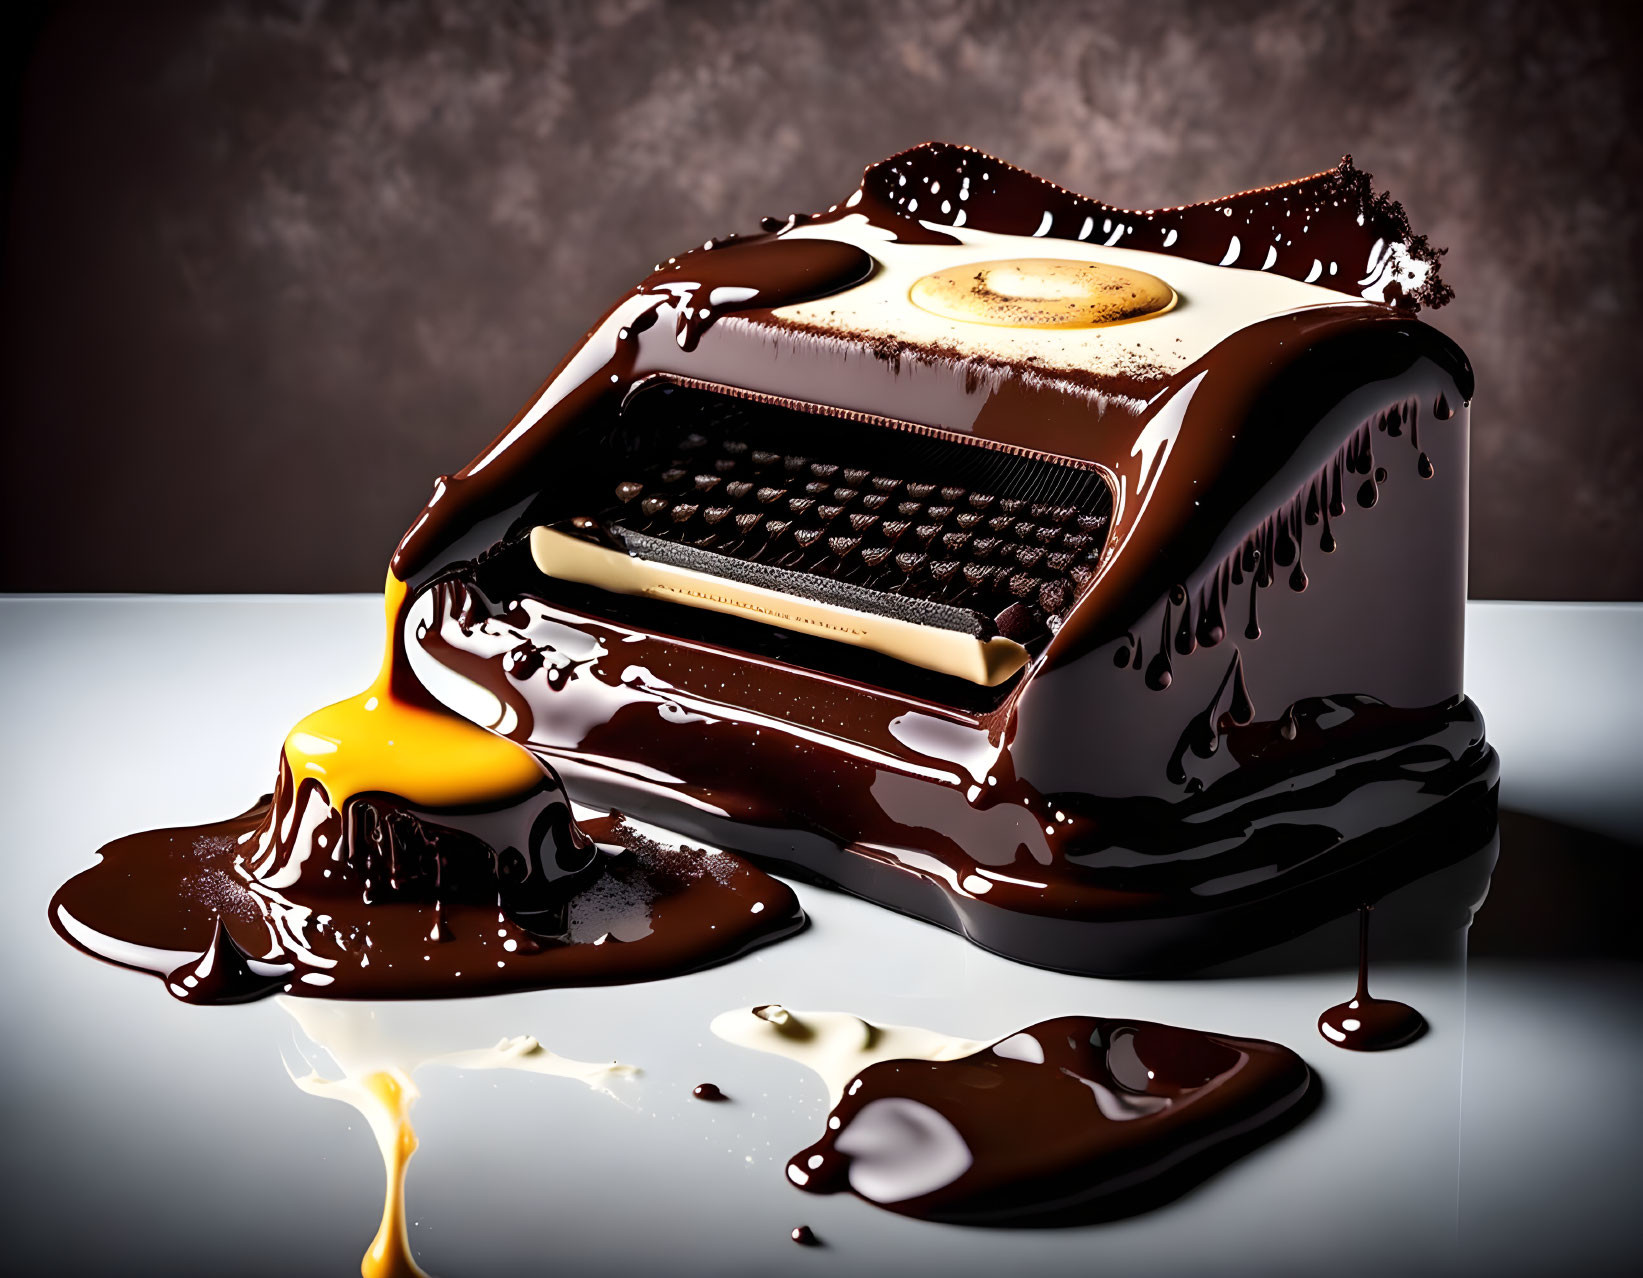 Vintage typewriter covered in chocolate and caramel on reflective surface with liquid sweets splash